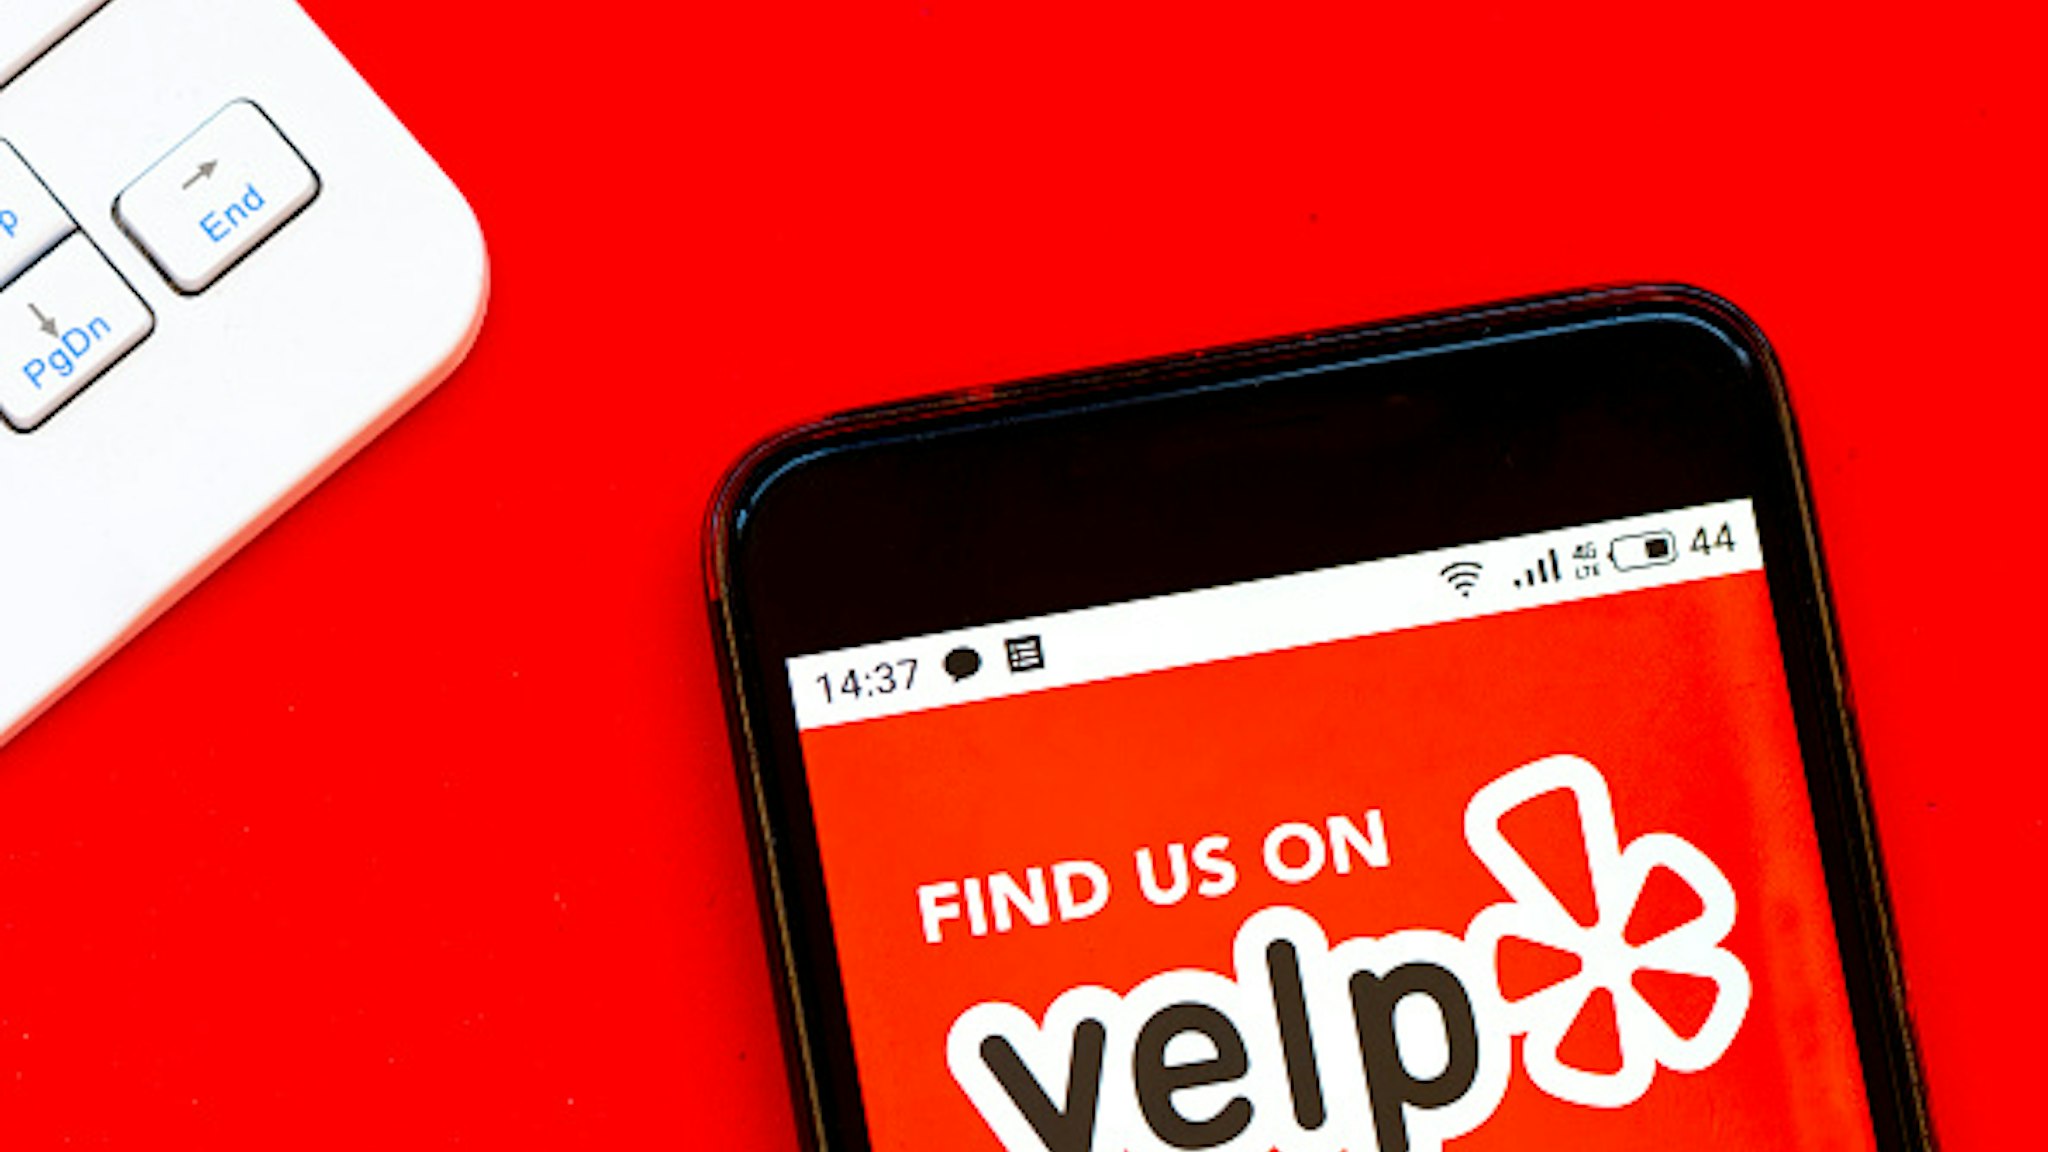 UKRAINE - 2020/04/07: In this photo illustration a Yelp logo seen displayed on a smartphone.